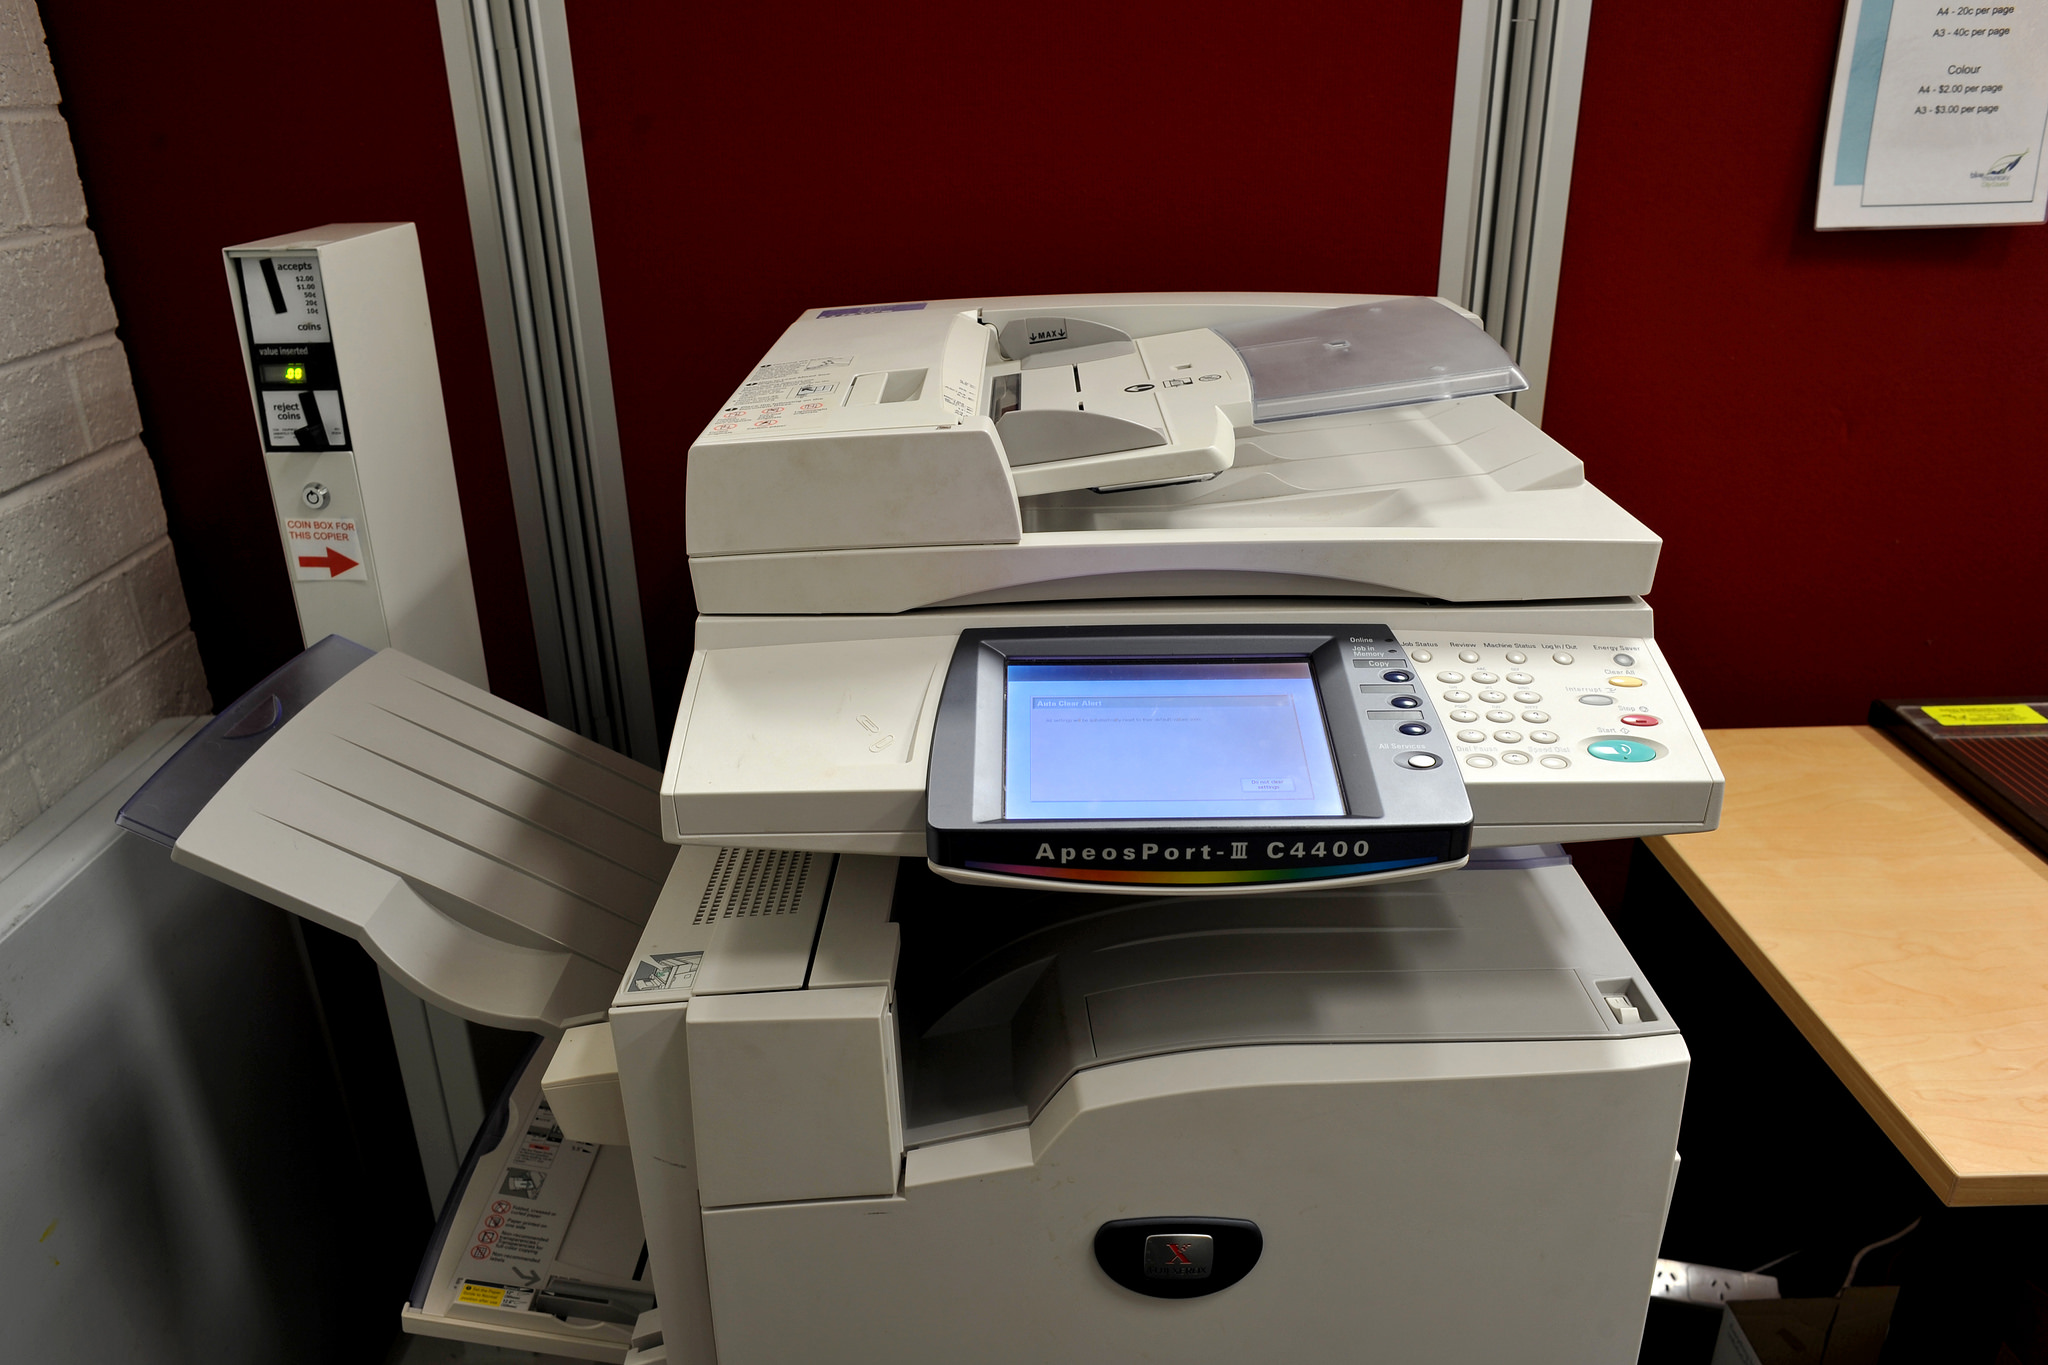 $1.2 Million for Breaches Caused by Photocopier Error